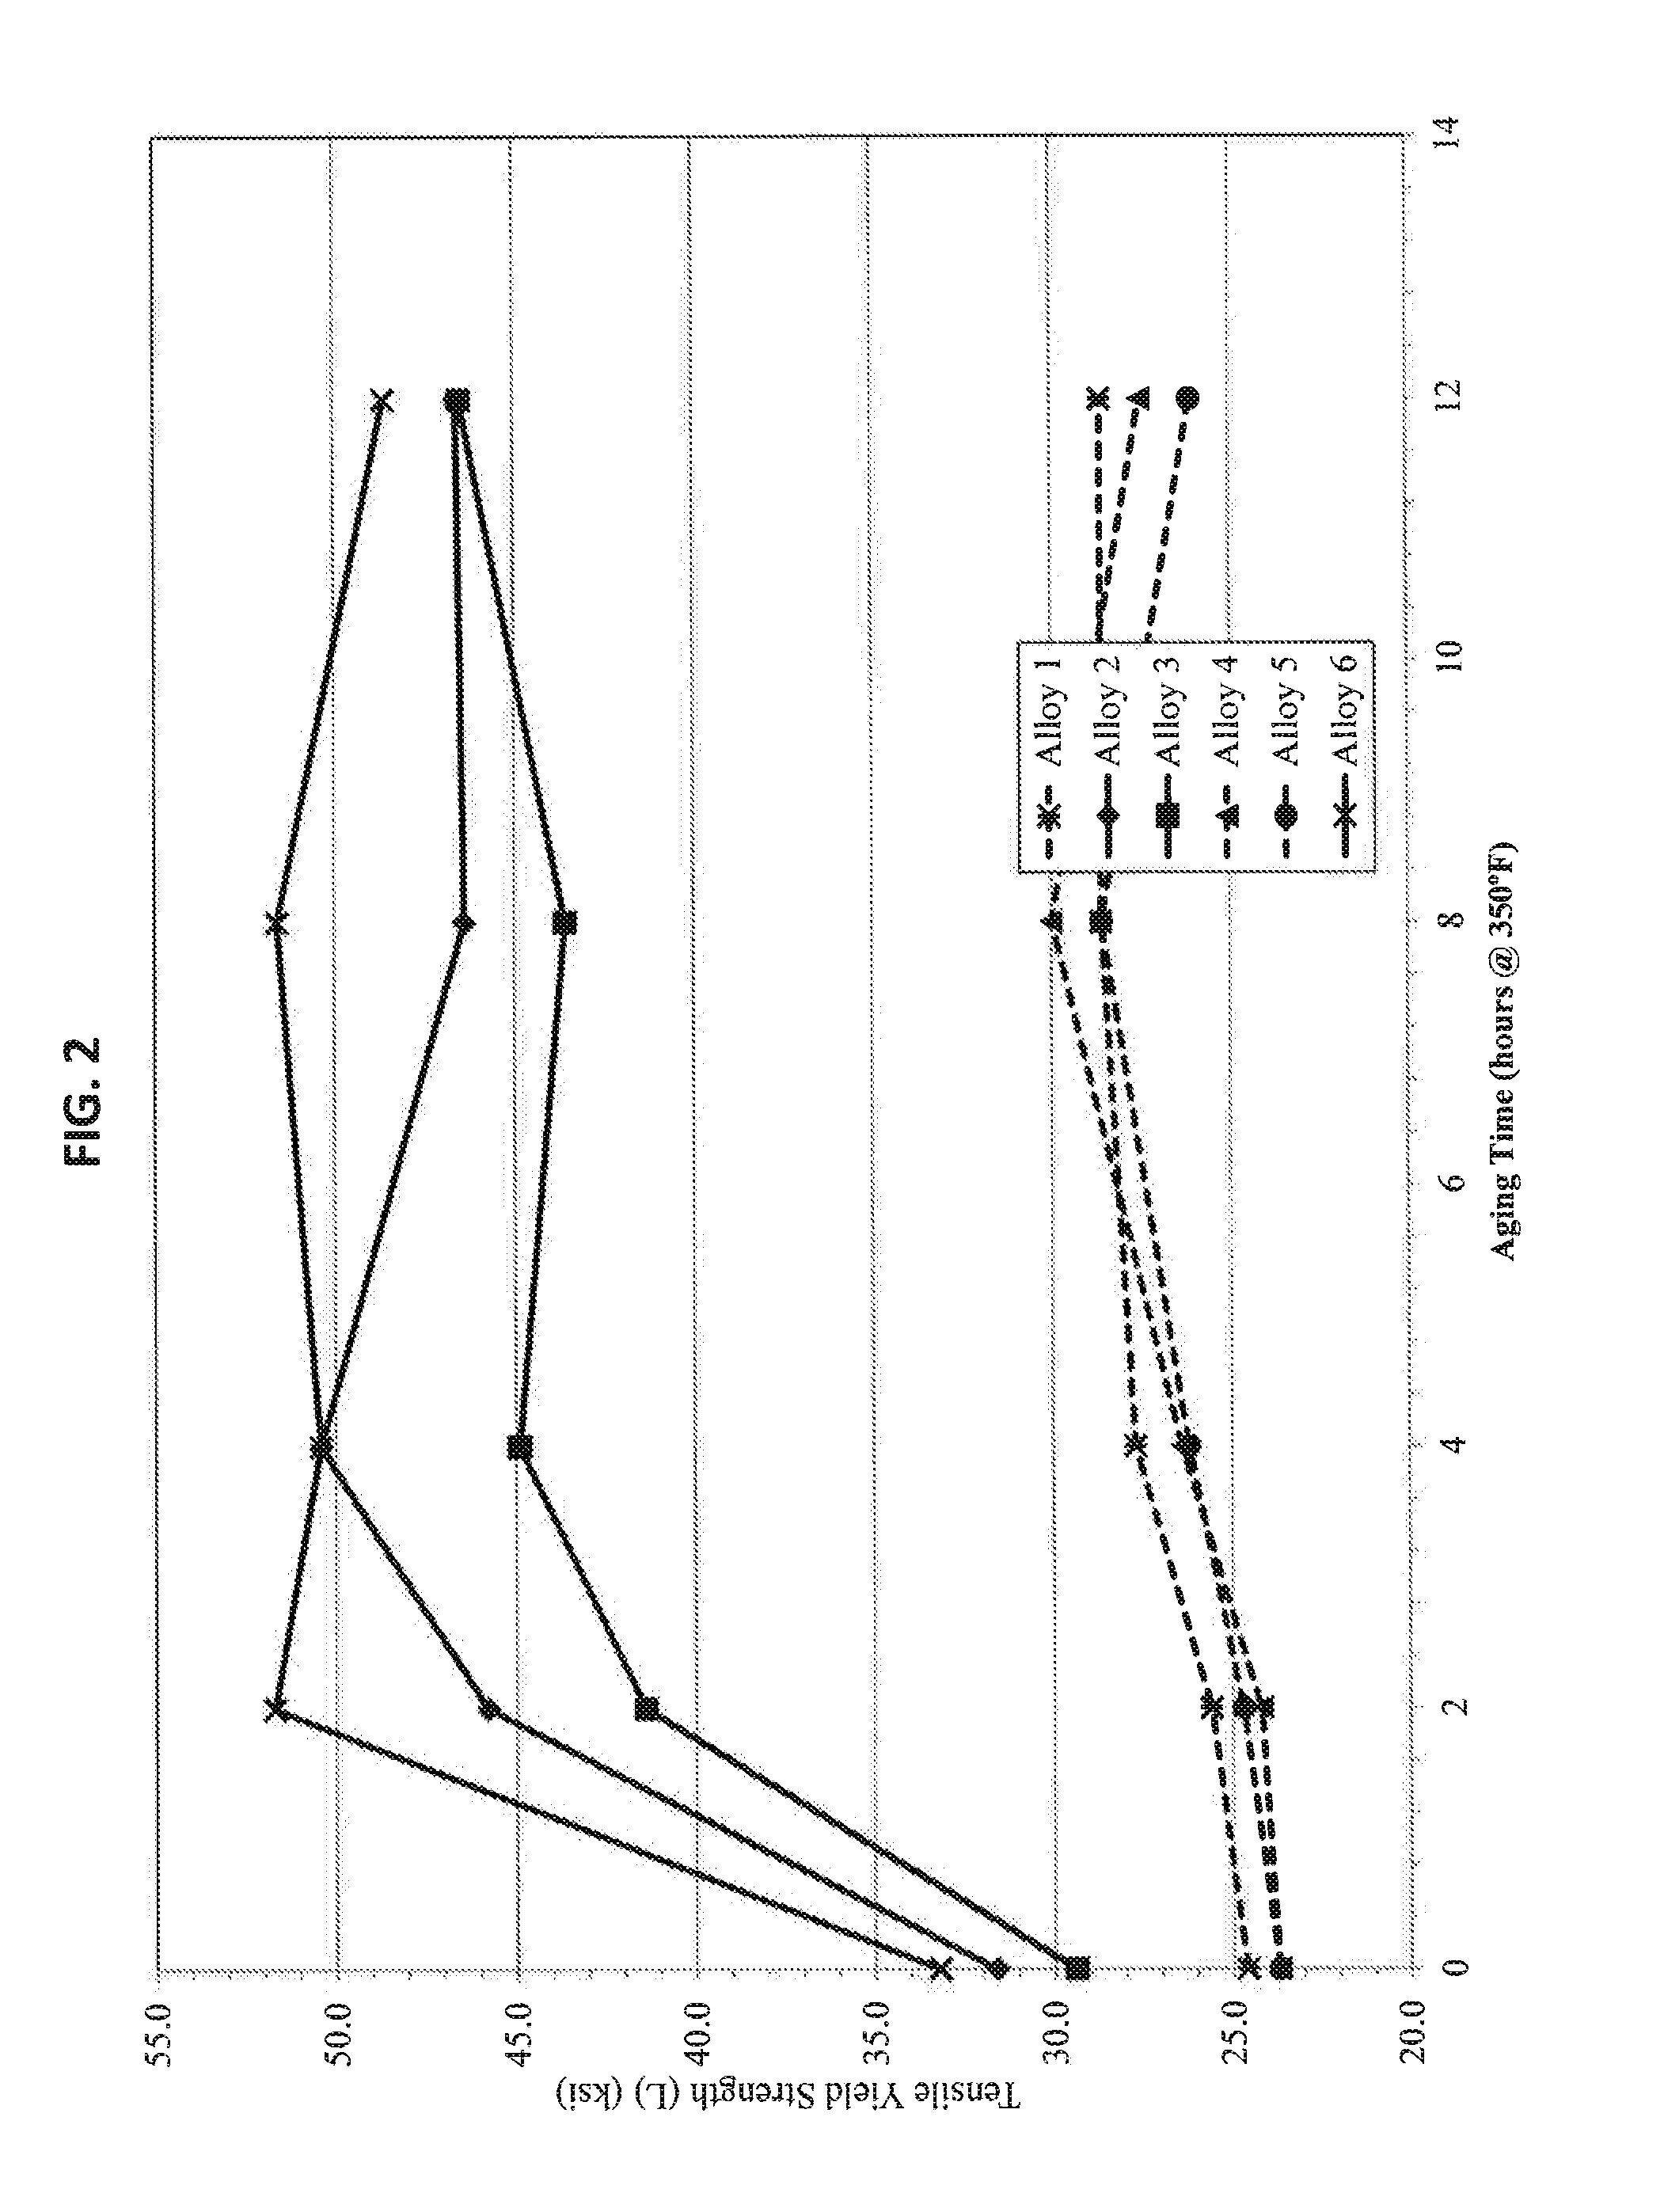 Heat treatable aluminum alloys having magnesium and zinc and methods for producing the same